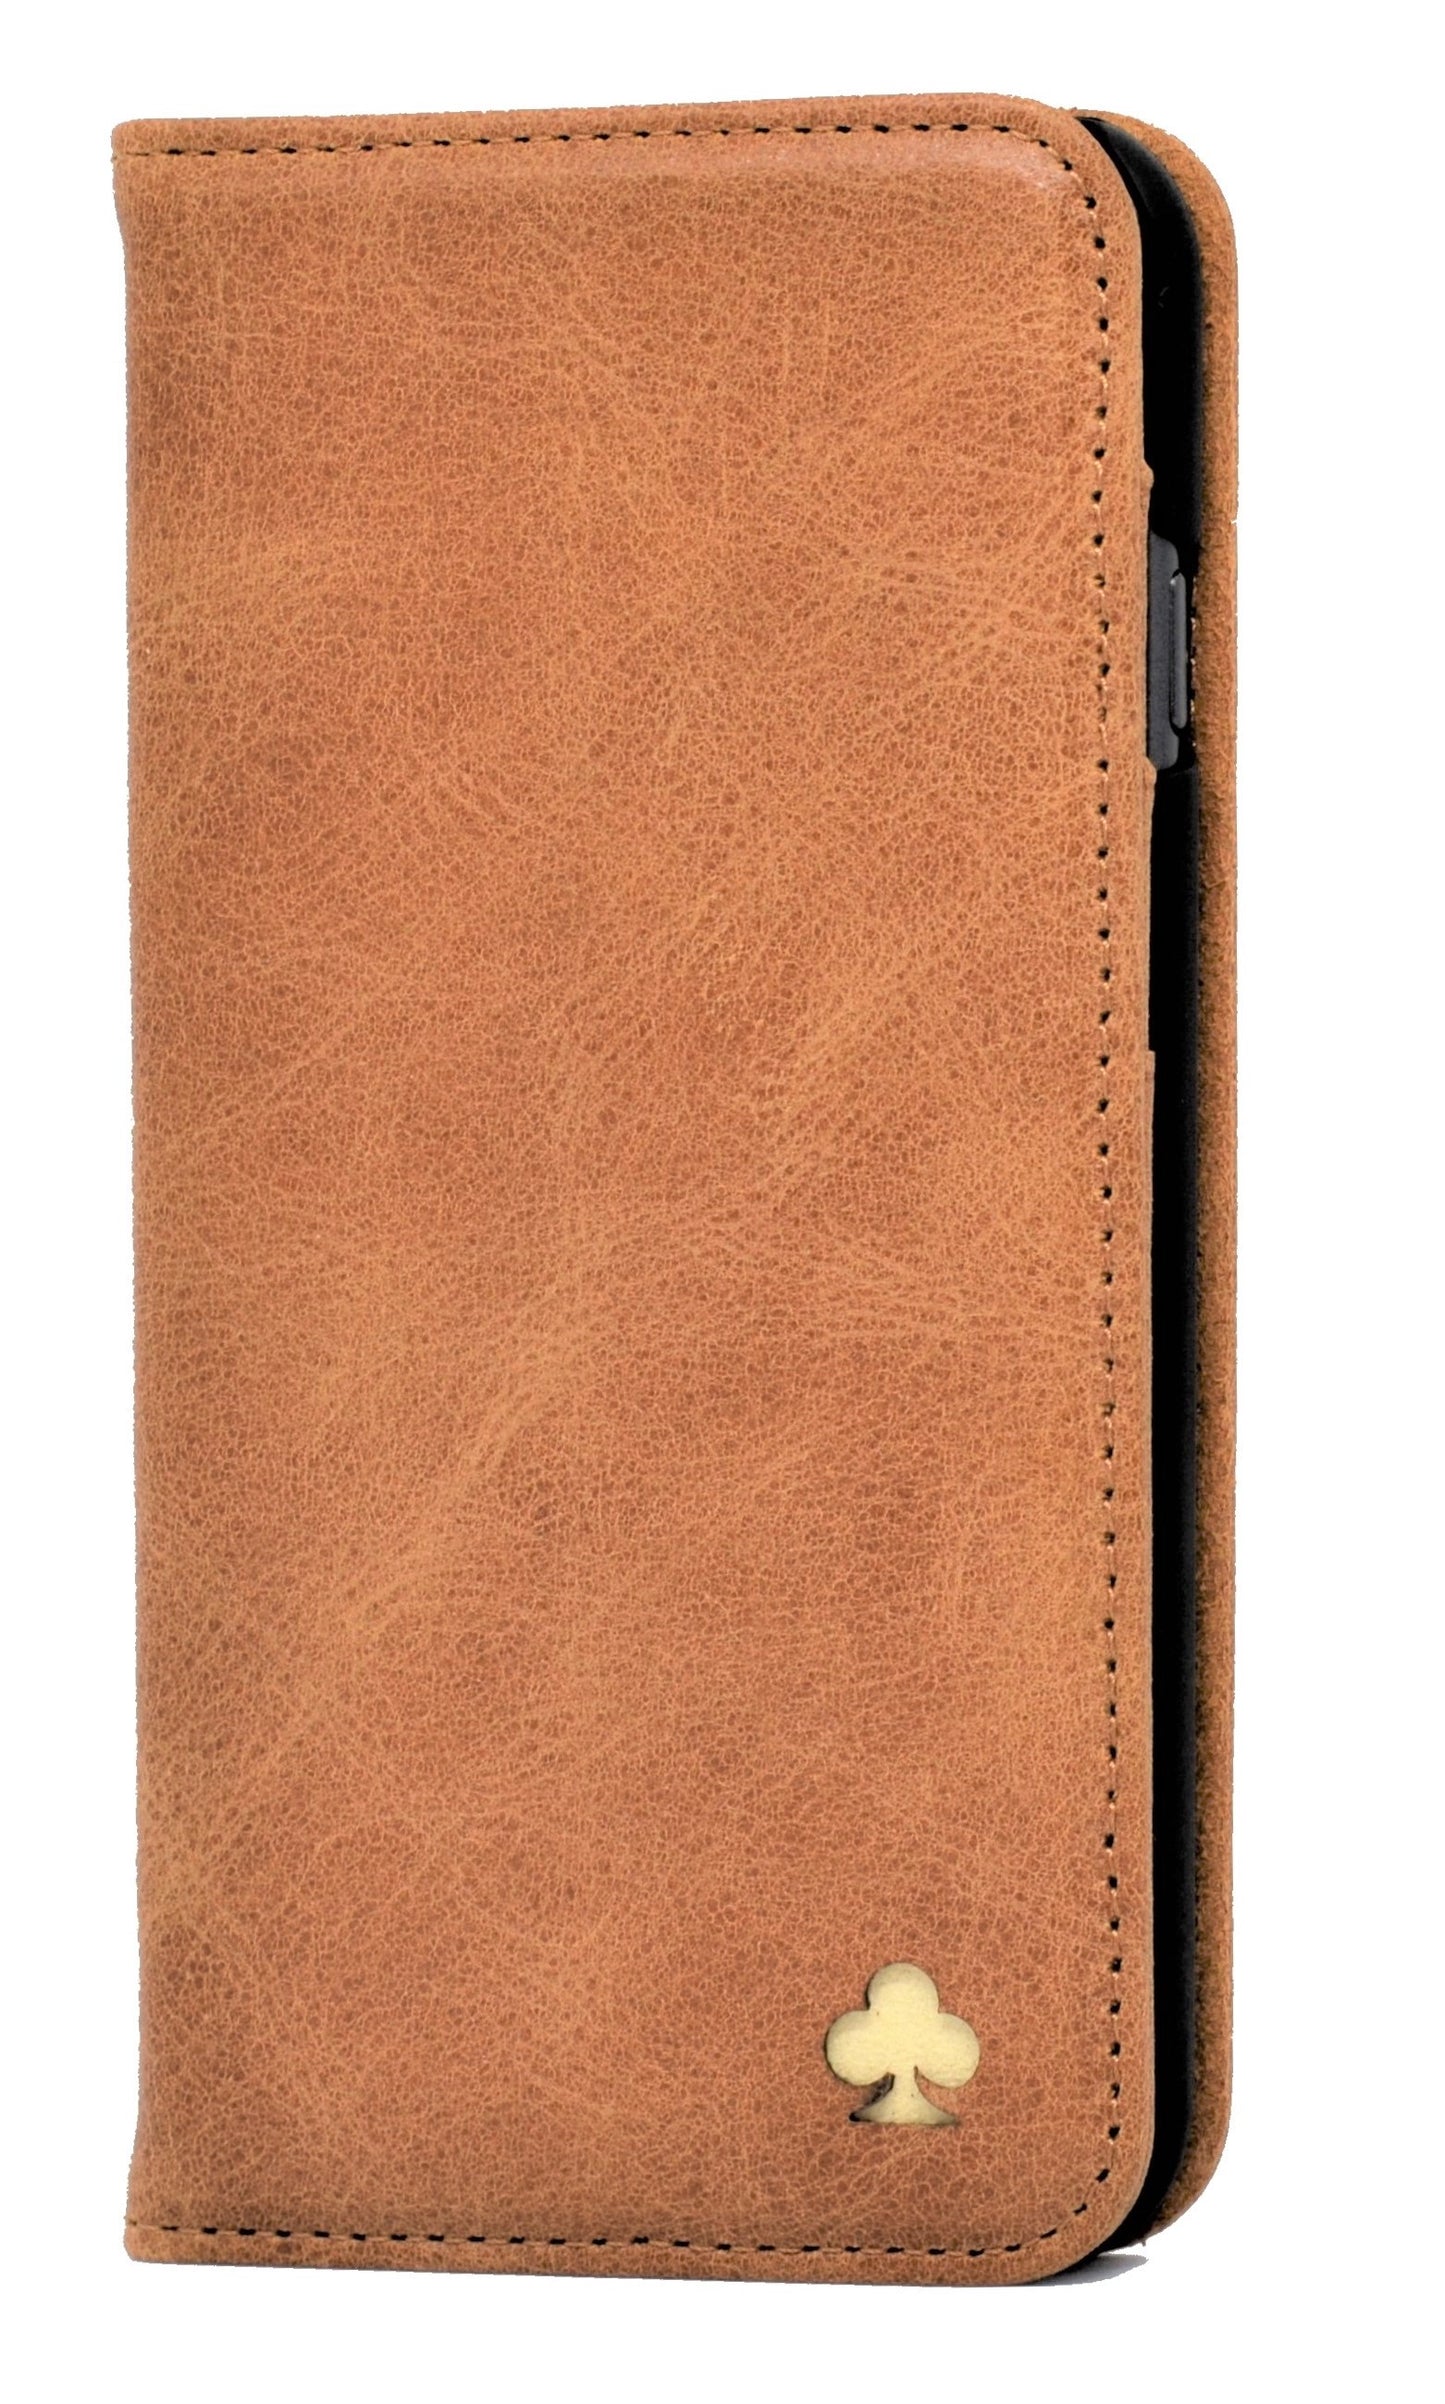 Samsung Galaxy S21 Ultra Leather Case. Premium Slim Genuine Leather Stand Case/Cover/Wallet (Tan)